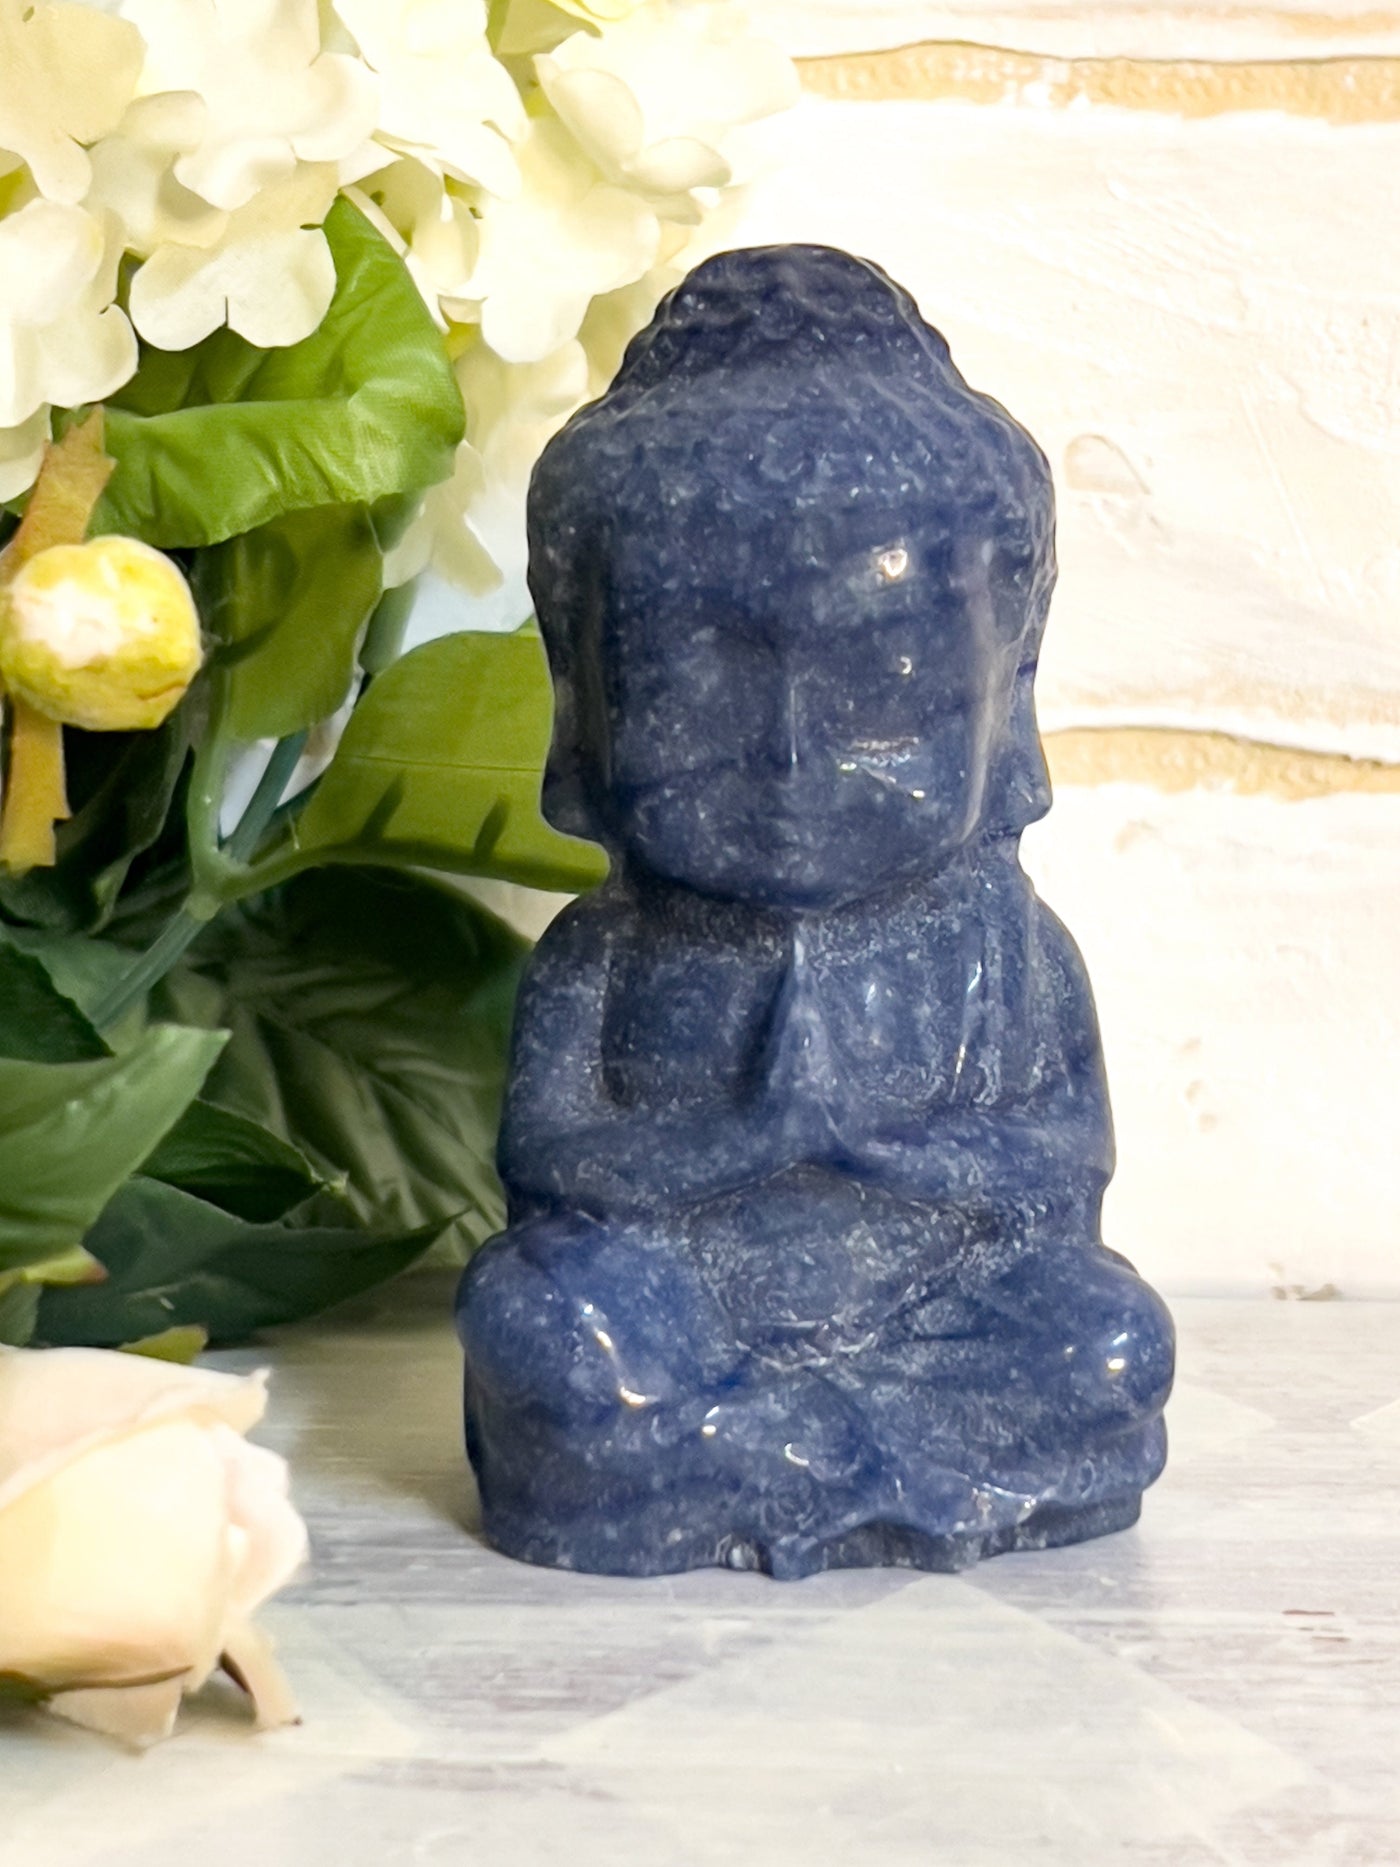 BLUE AVENTURINE BUDDHA Revive In Style Vintage Furniture Painted Refinished Redesign Beautiful One of a Kind Artistic Antique Unique Home Decor Interior Design French Country Shabby Chic Cottage Farmhouse Grandmillenial Coastal Chalk Paint Metallic Glam Eclectic Quality Dovetailed Rustic Furniture Painter Pinterest Bedroom Living Room Entryway Kitchen Home Trends House Styles Decorating ideas